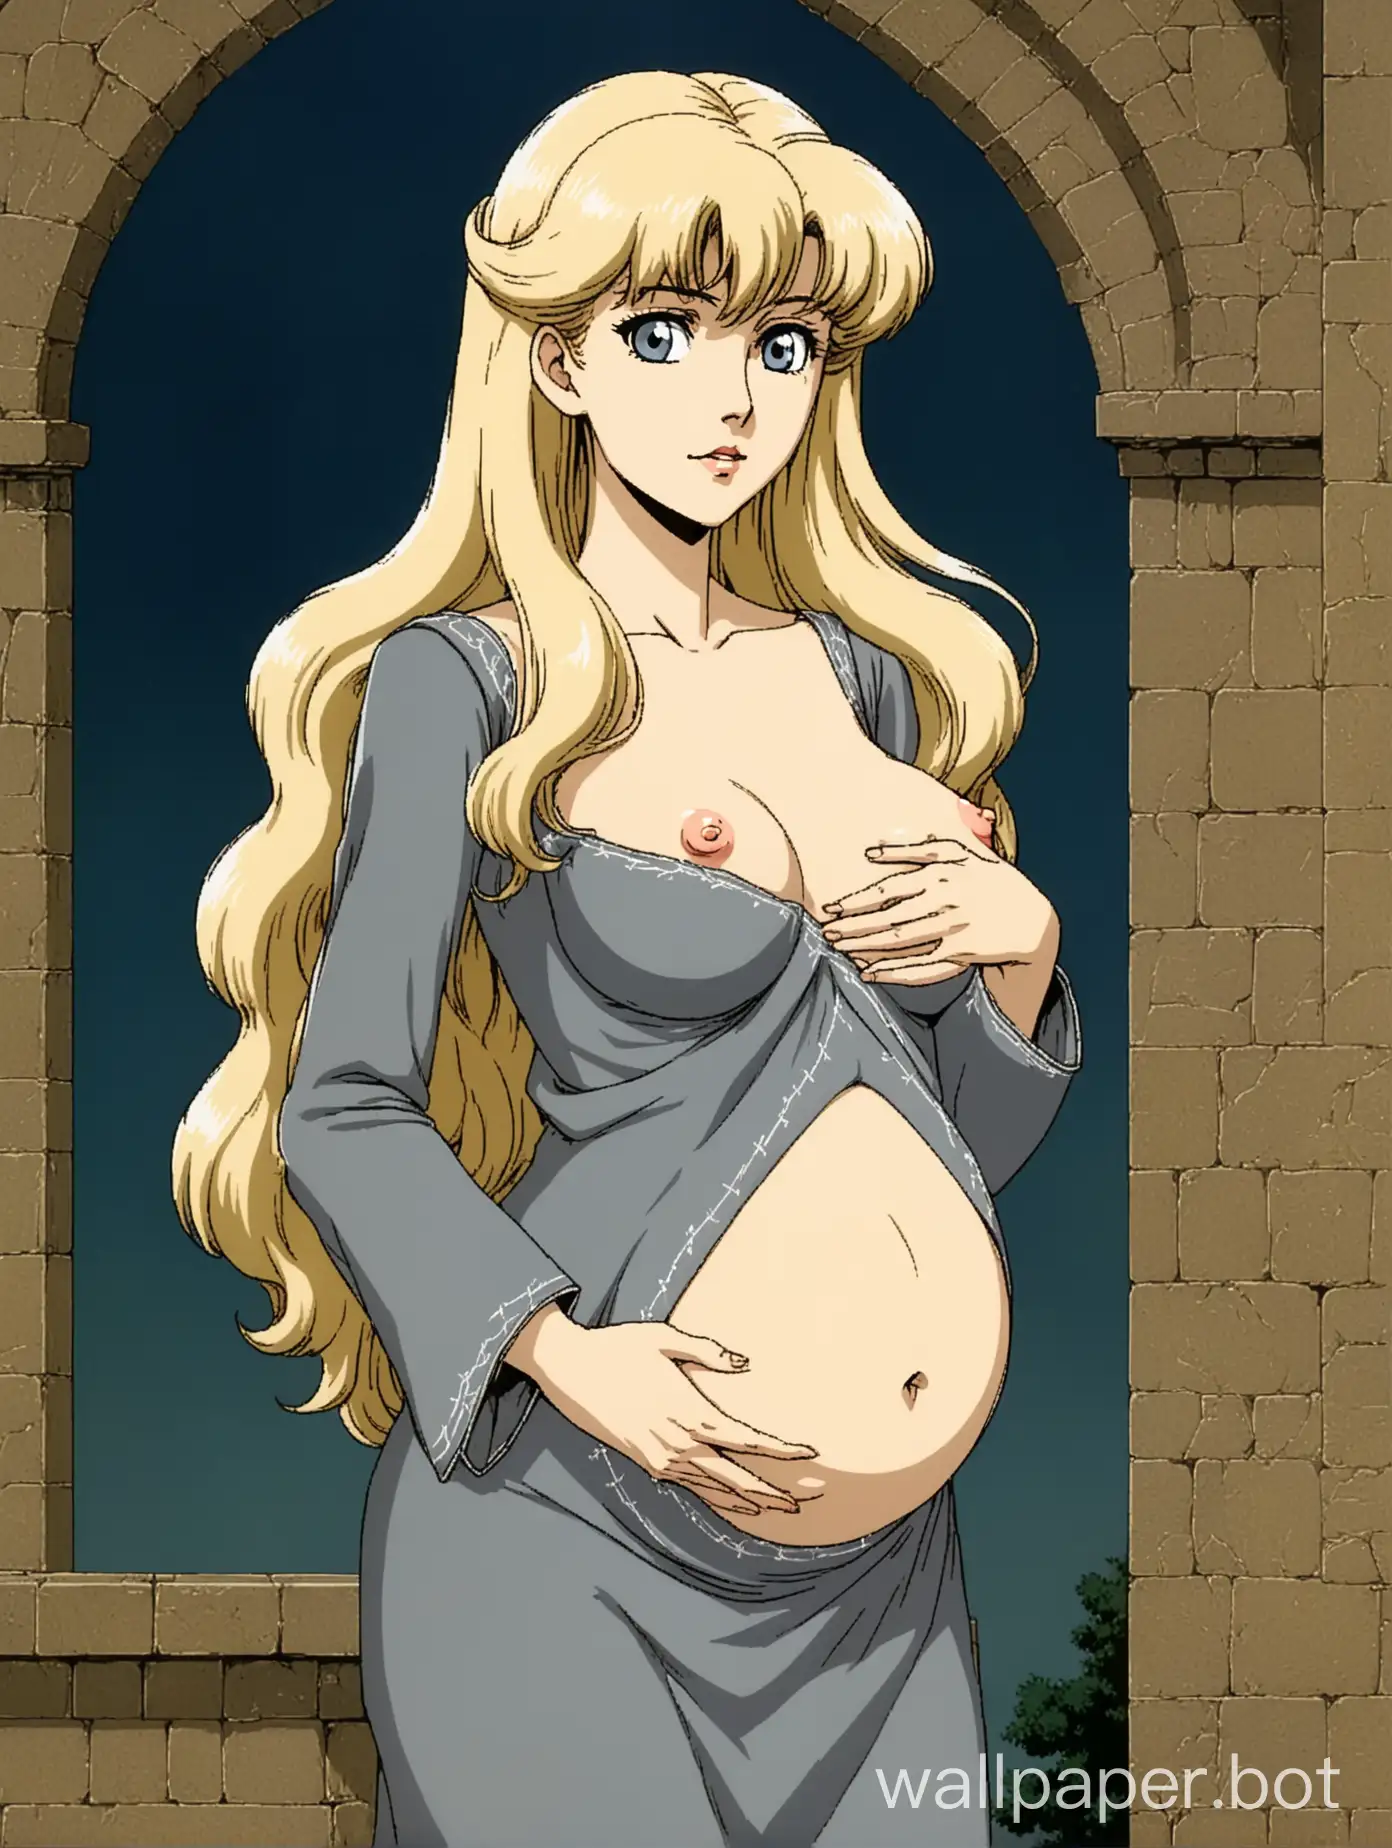 1980s retro anime, portrait of a young and attractive white woman posed without clothing, she is pregnant, she has long wavy white-blonde hair, standing regally, elegant and slender, thin sharp face, wearing a thin long dark grey skirt, exposed belly, navel, gorgeous breasts, perky nipples, decorative stitching, medieval elegance, 1980s retro anime